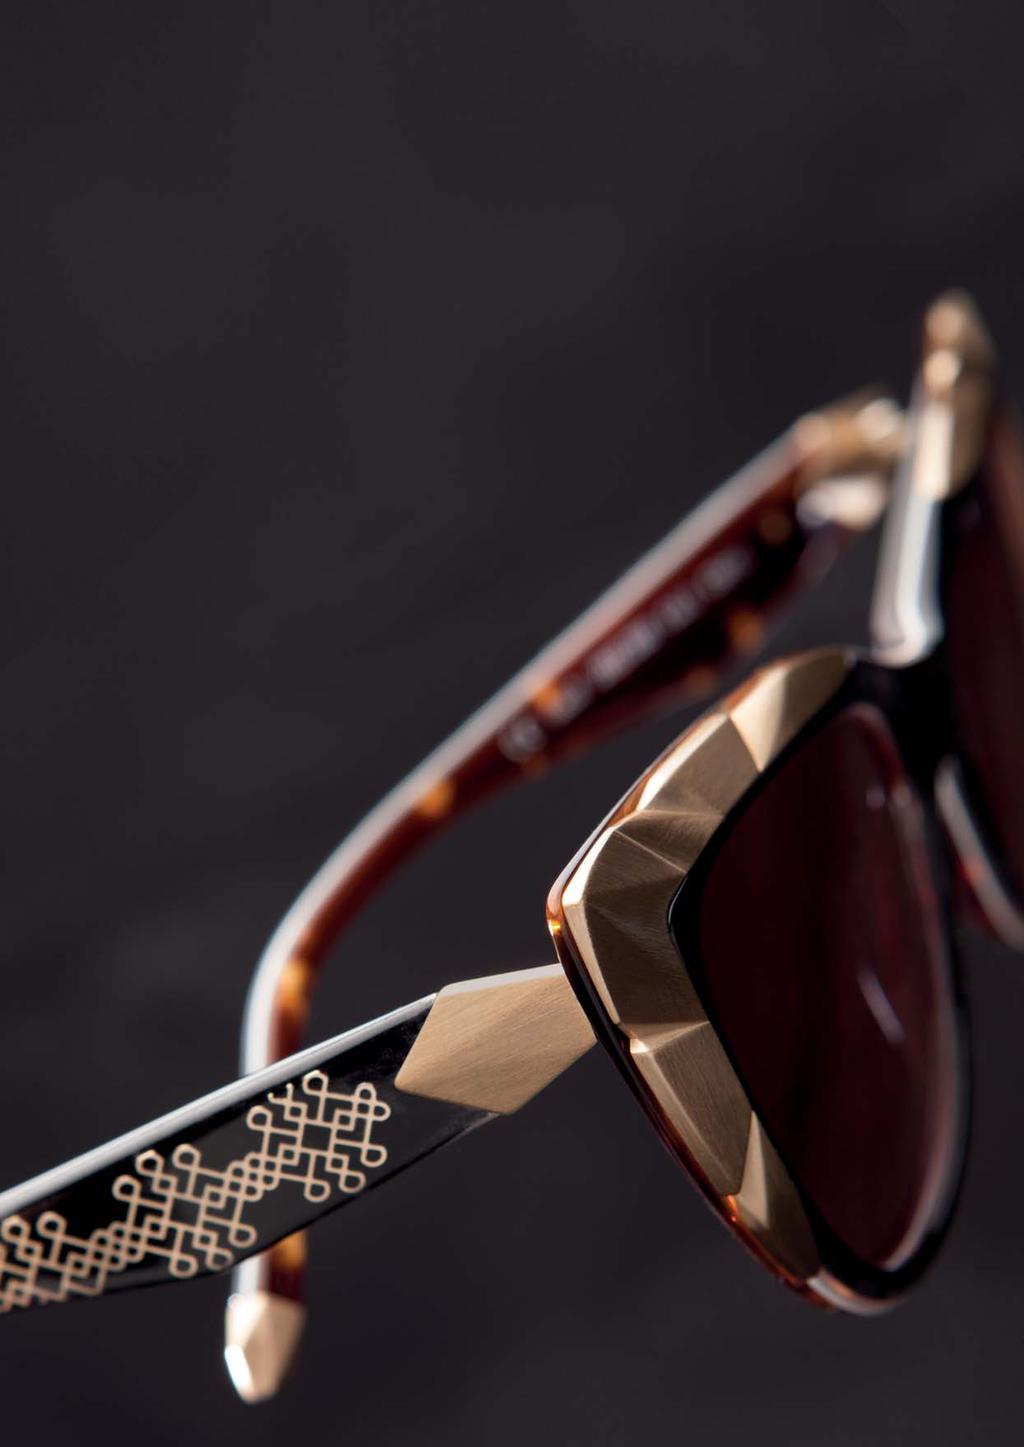 Zhe Zhi A contemporary interpretation of elements from the tradition of the ancient dynasties of the Far East: this is the basis of the Zhe Zhi sunglasses